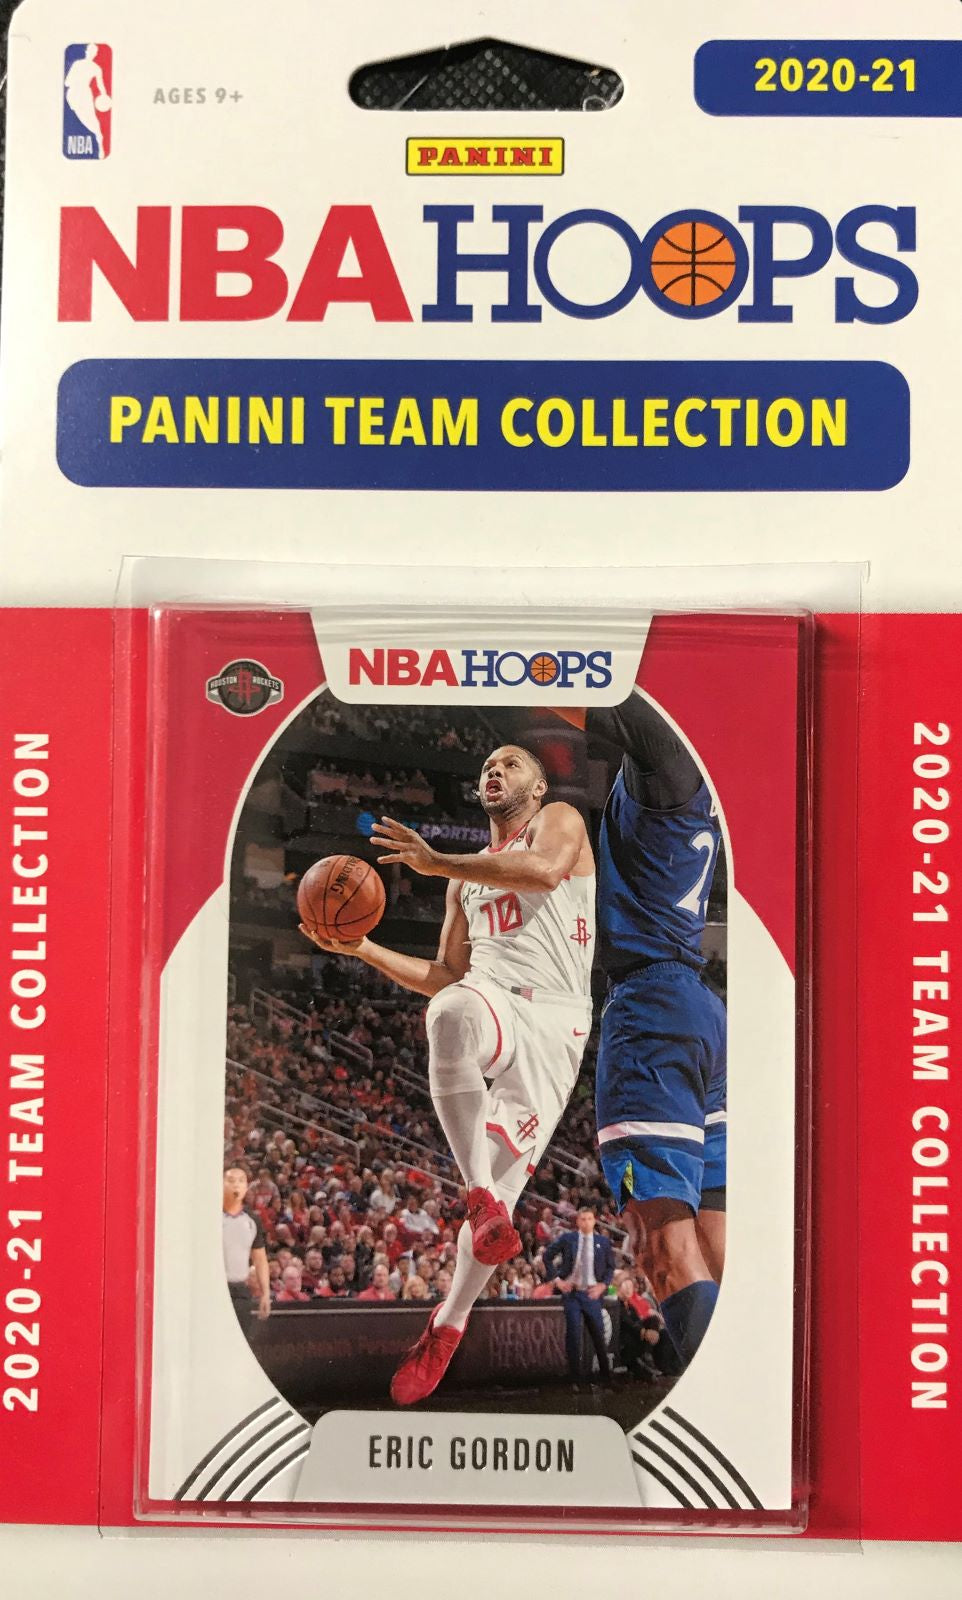 Houston Rockets 2020 2021 Hoops Factory Sealed Team Set with Kenyon Martin Jr. Rookie Card #232